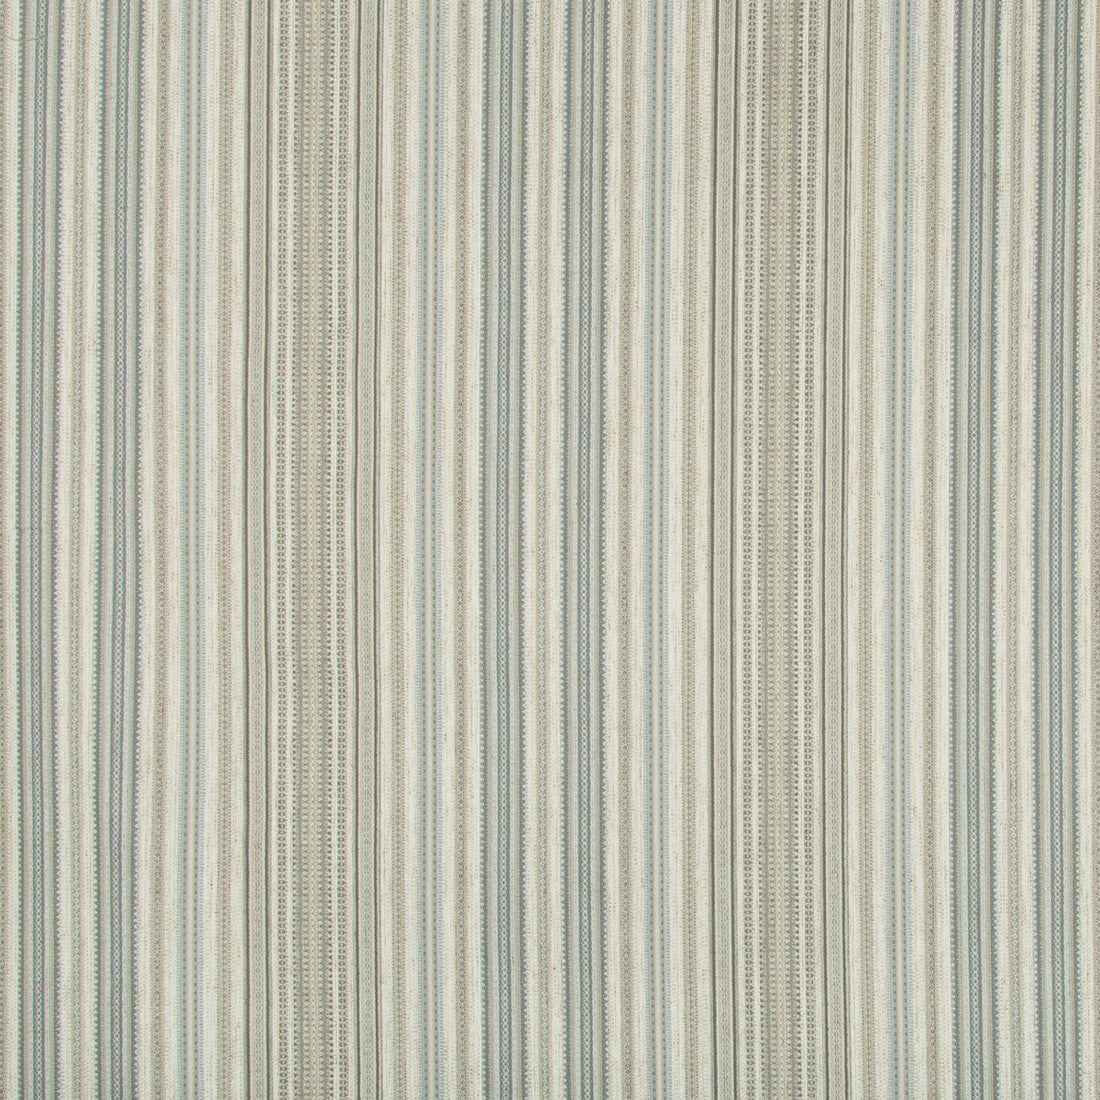 Kravet Contract fabric in 35036-1611 color - pattern 35036.1611.0 - by Kravet Contract in the Incase Crypton Gis collection